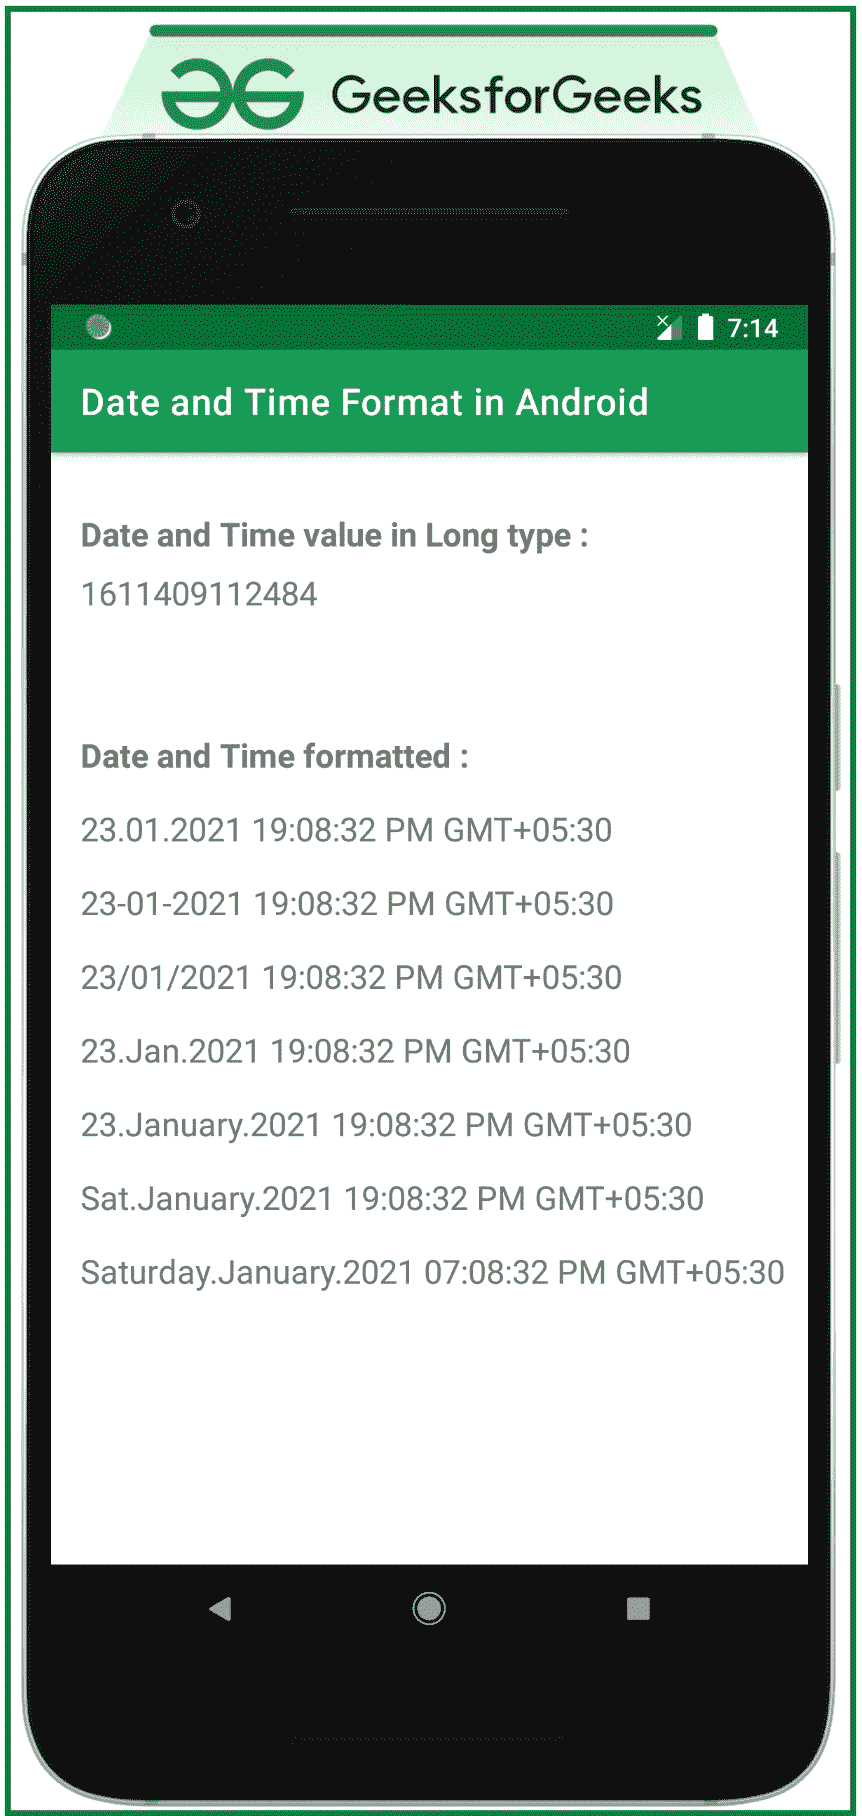 Date and Time Formatting in Android